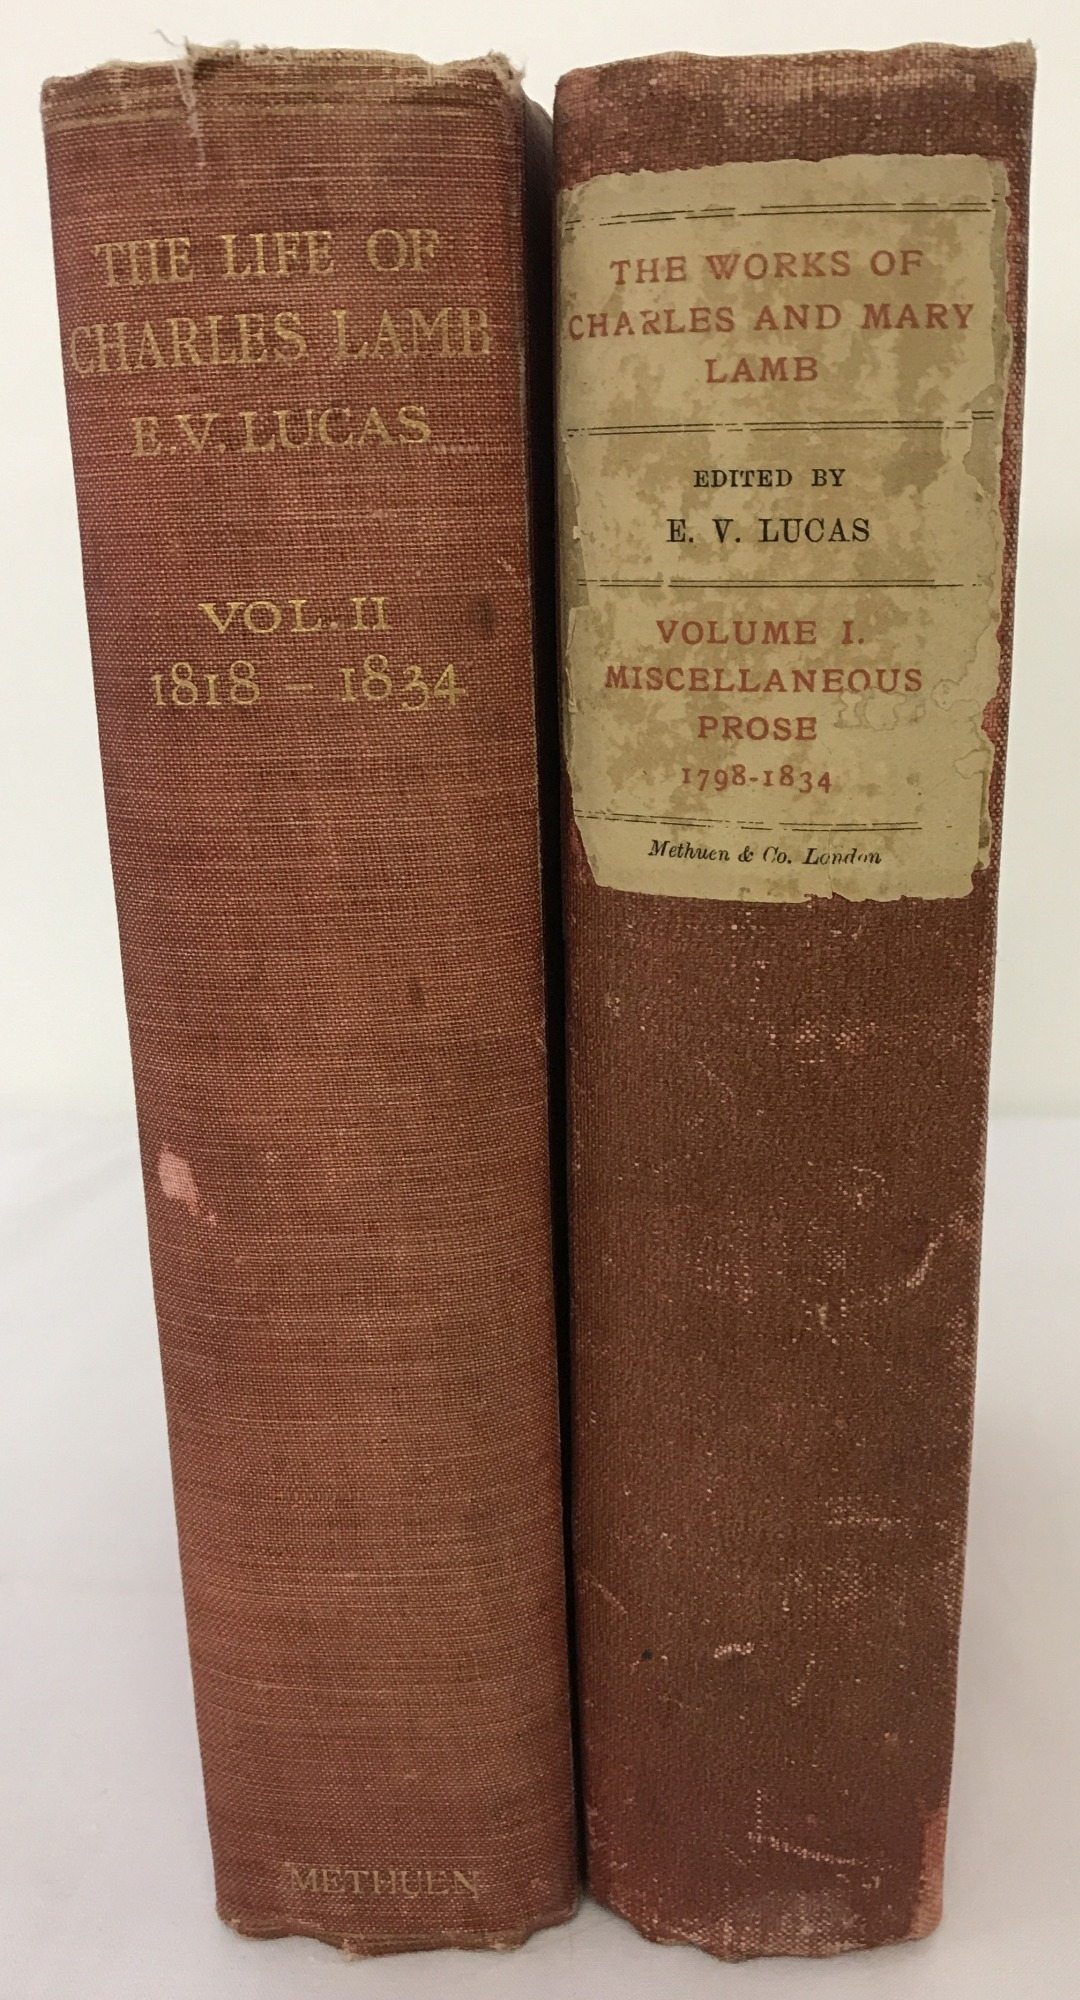 2 antique books, The Works of Charles and Mary Lamb in 2 volumes by E.V. Lucas.